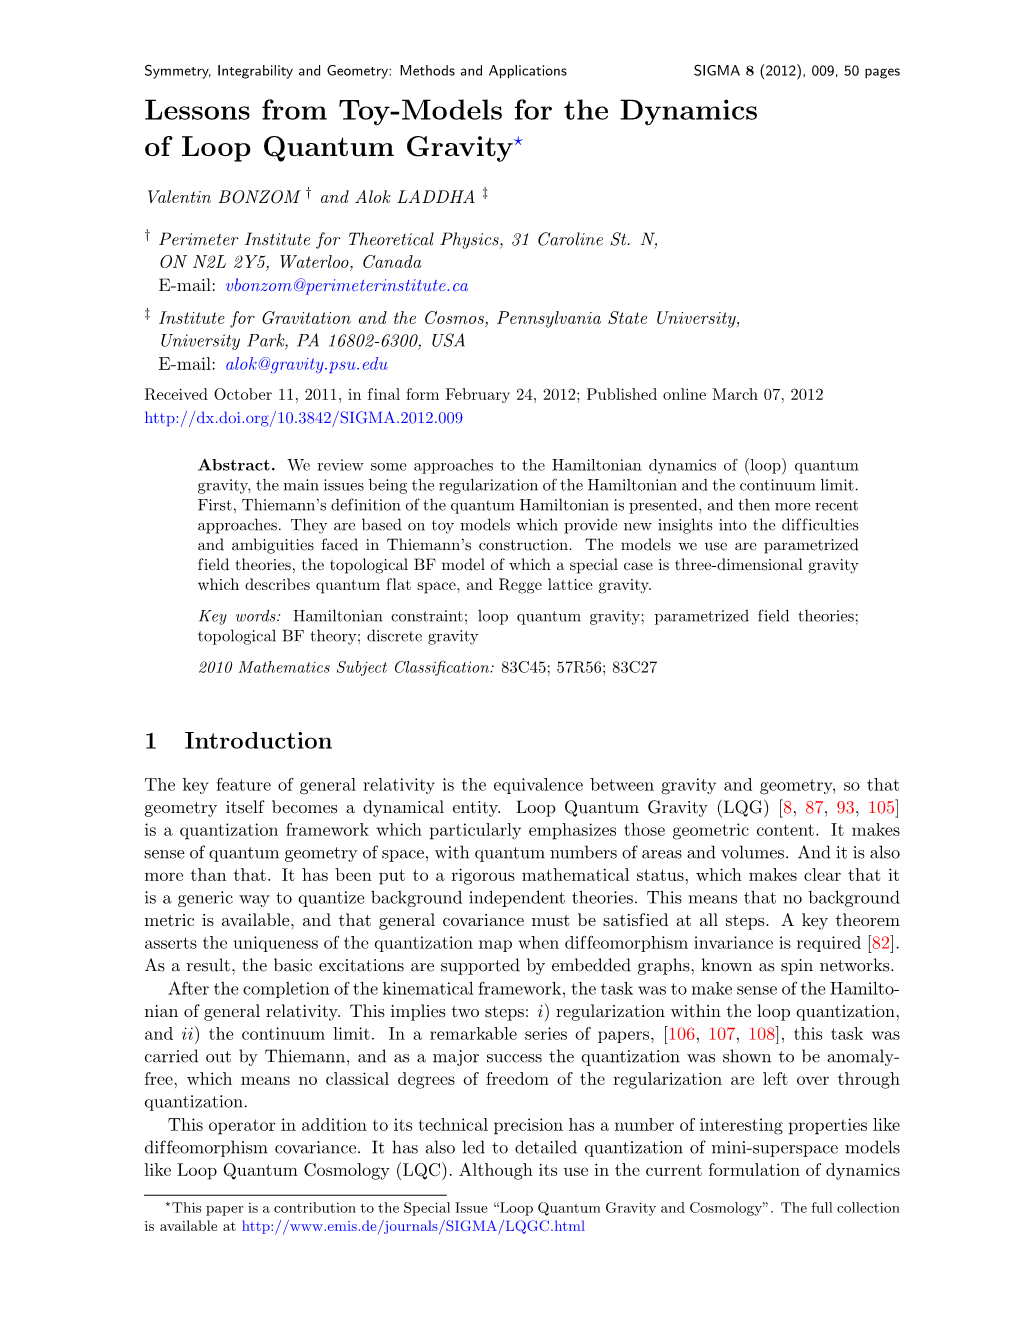 Lessons from Toy-Models for the Dynamics of Loop Quantum Gravity⋆